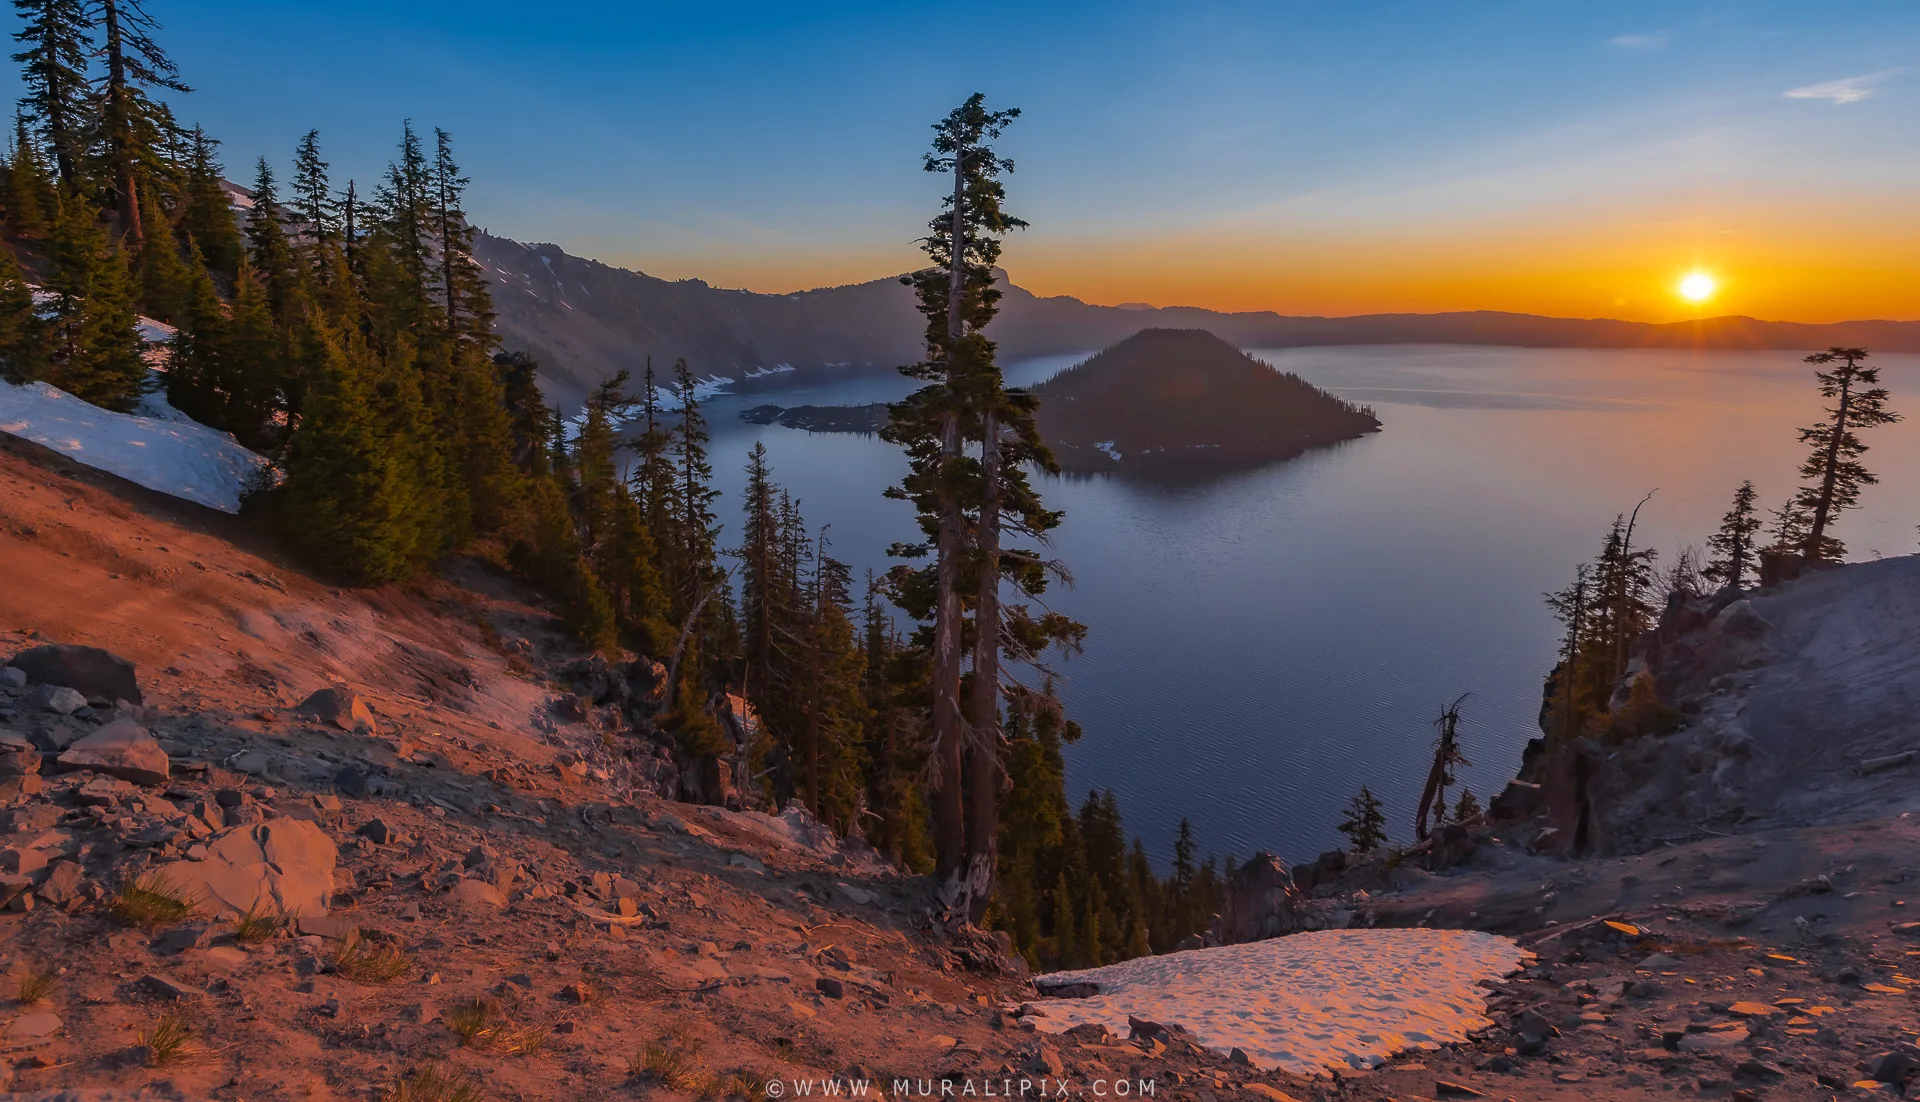 Crater Lake Discovery Point At Sunrise Usa 9lts.webp?h=1400&q=83